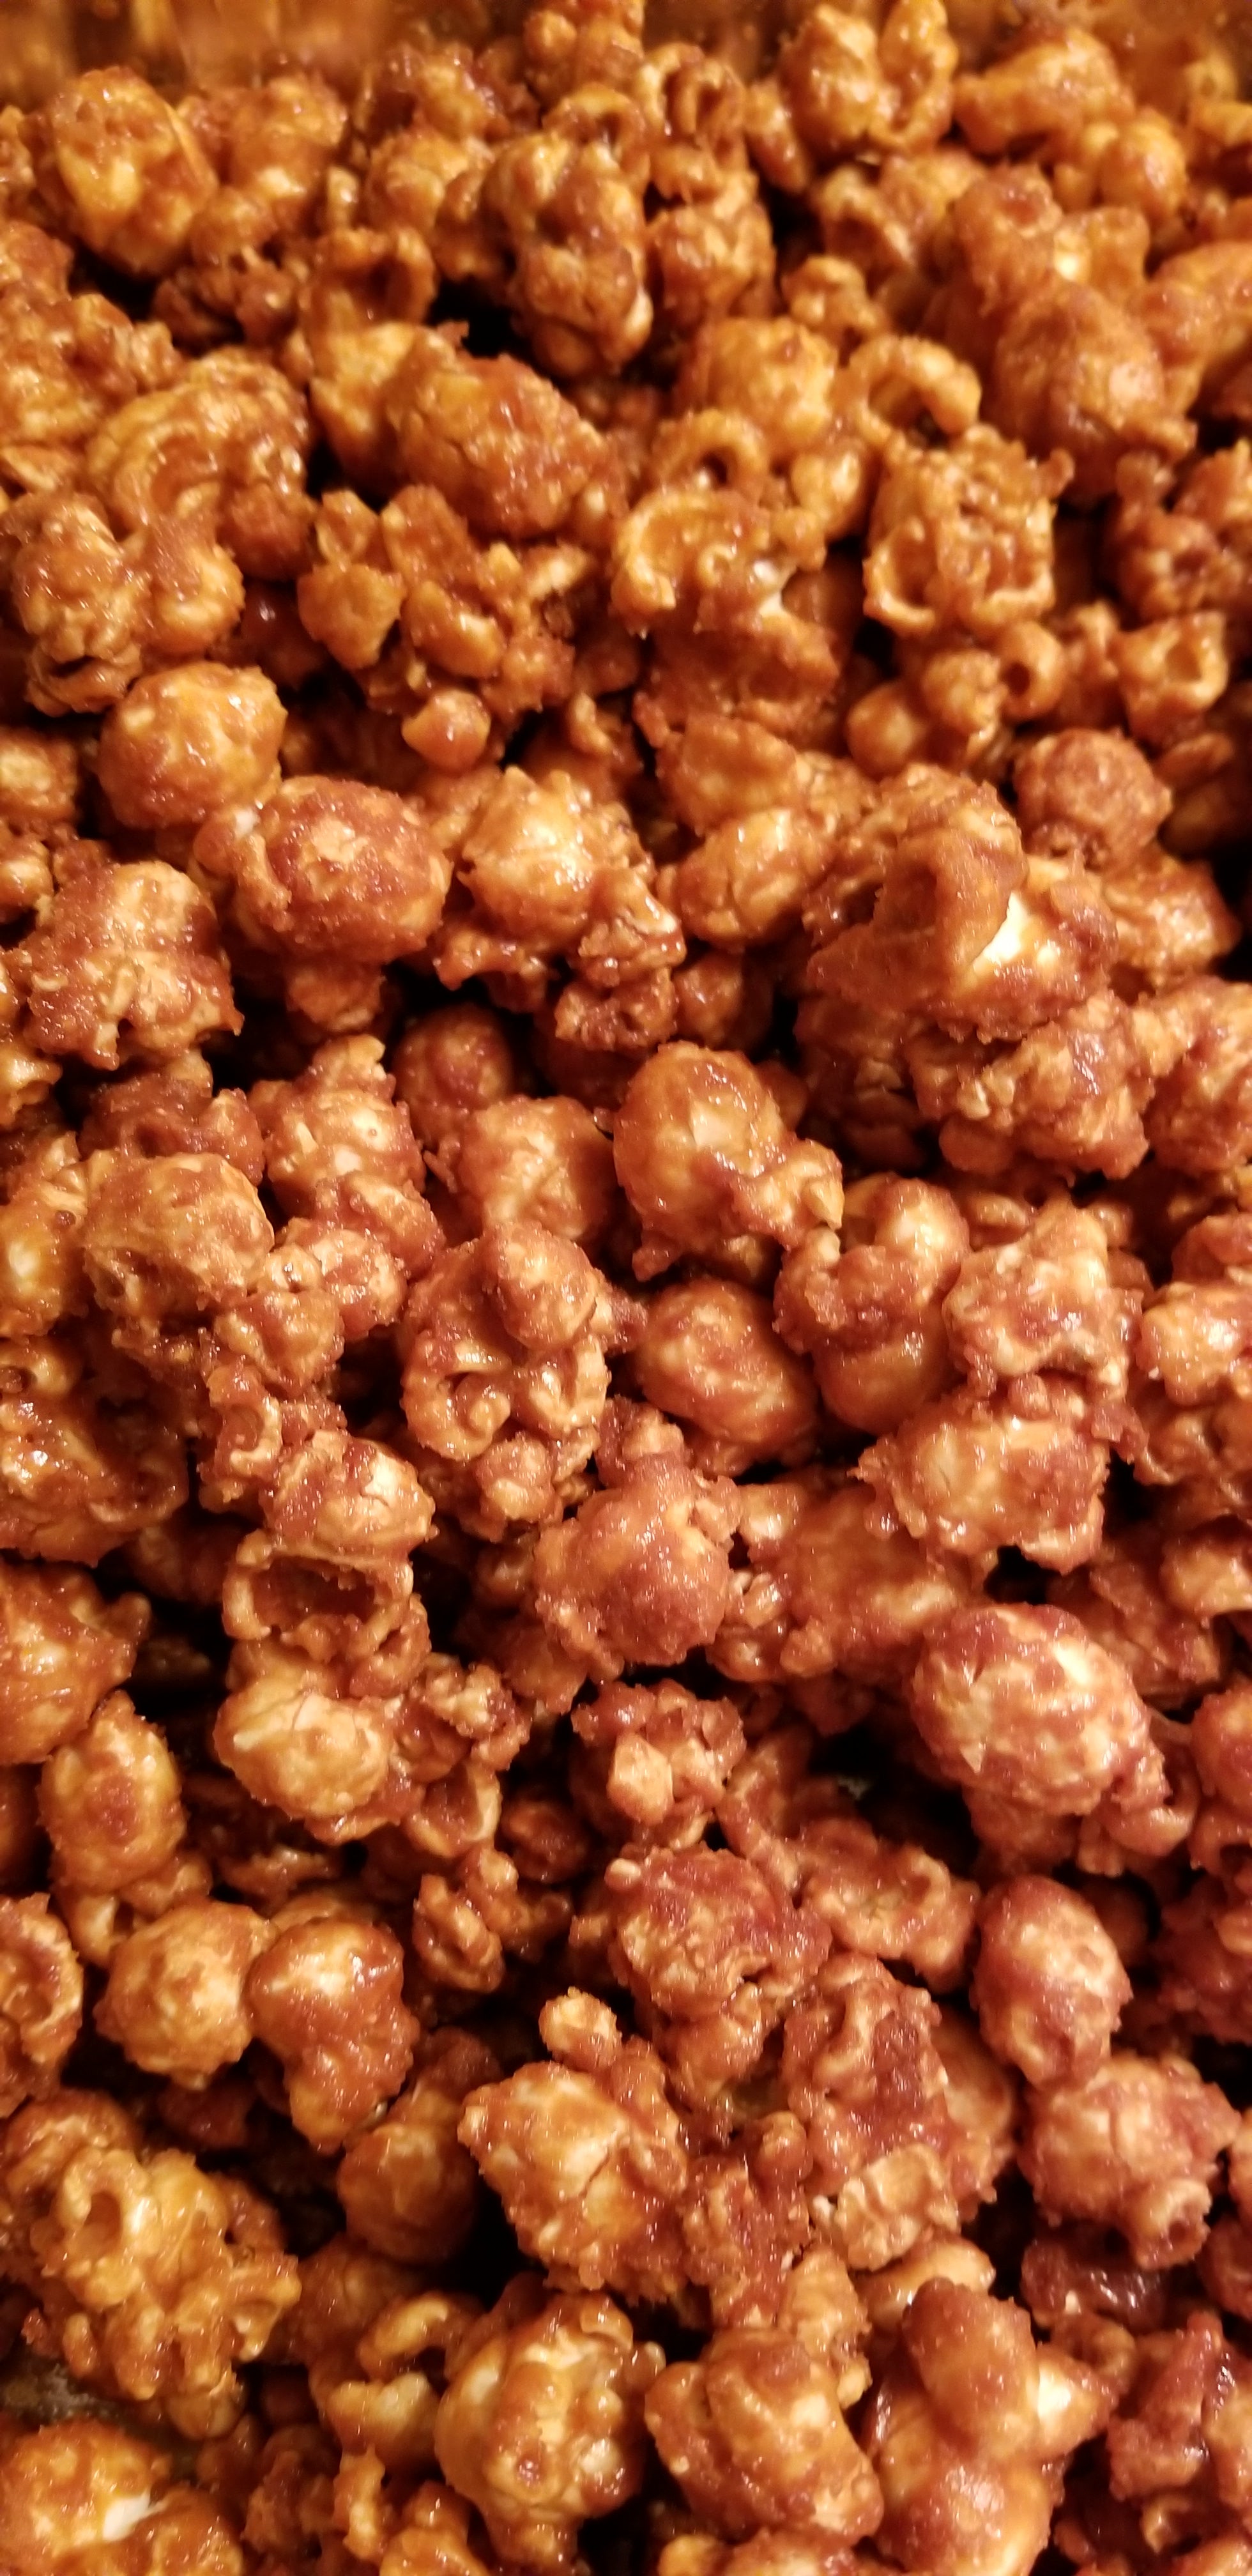 Spirit Infused (Crown Royal Apple) Gourmet Popcorn (Build Your Own 3 Pack)